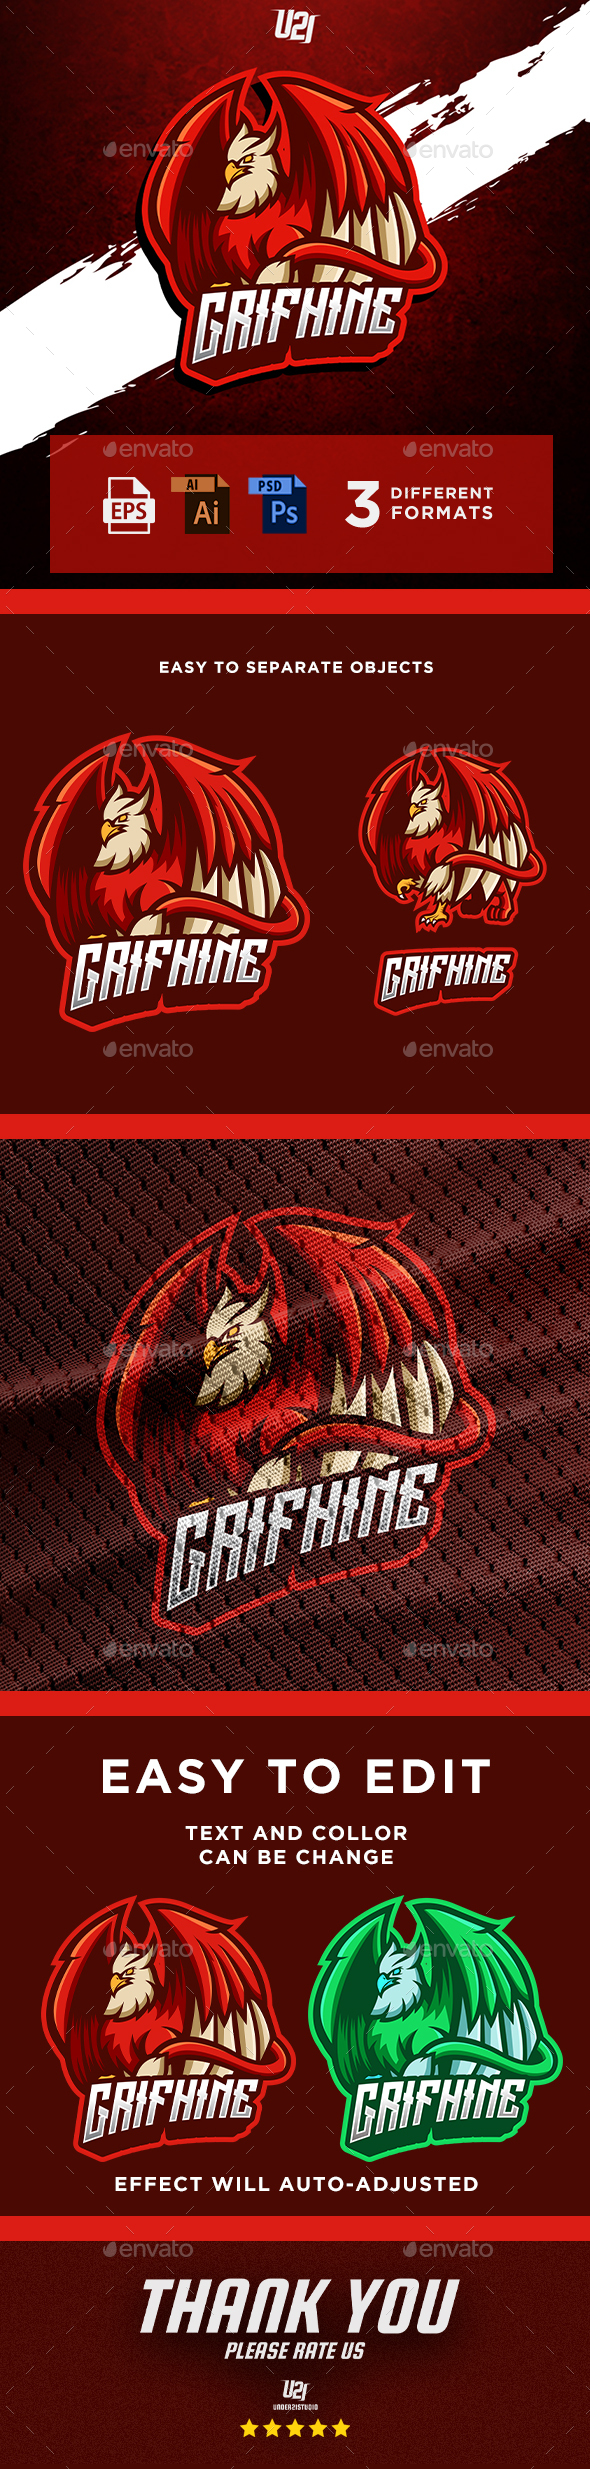 Grifhine Gaming Mascot For Esports